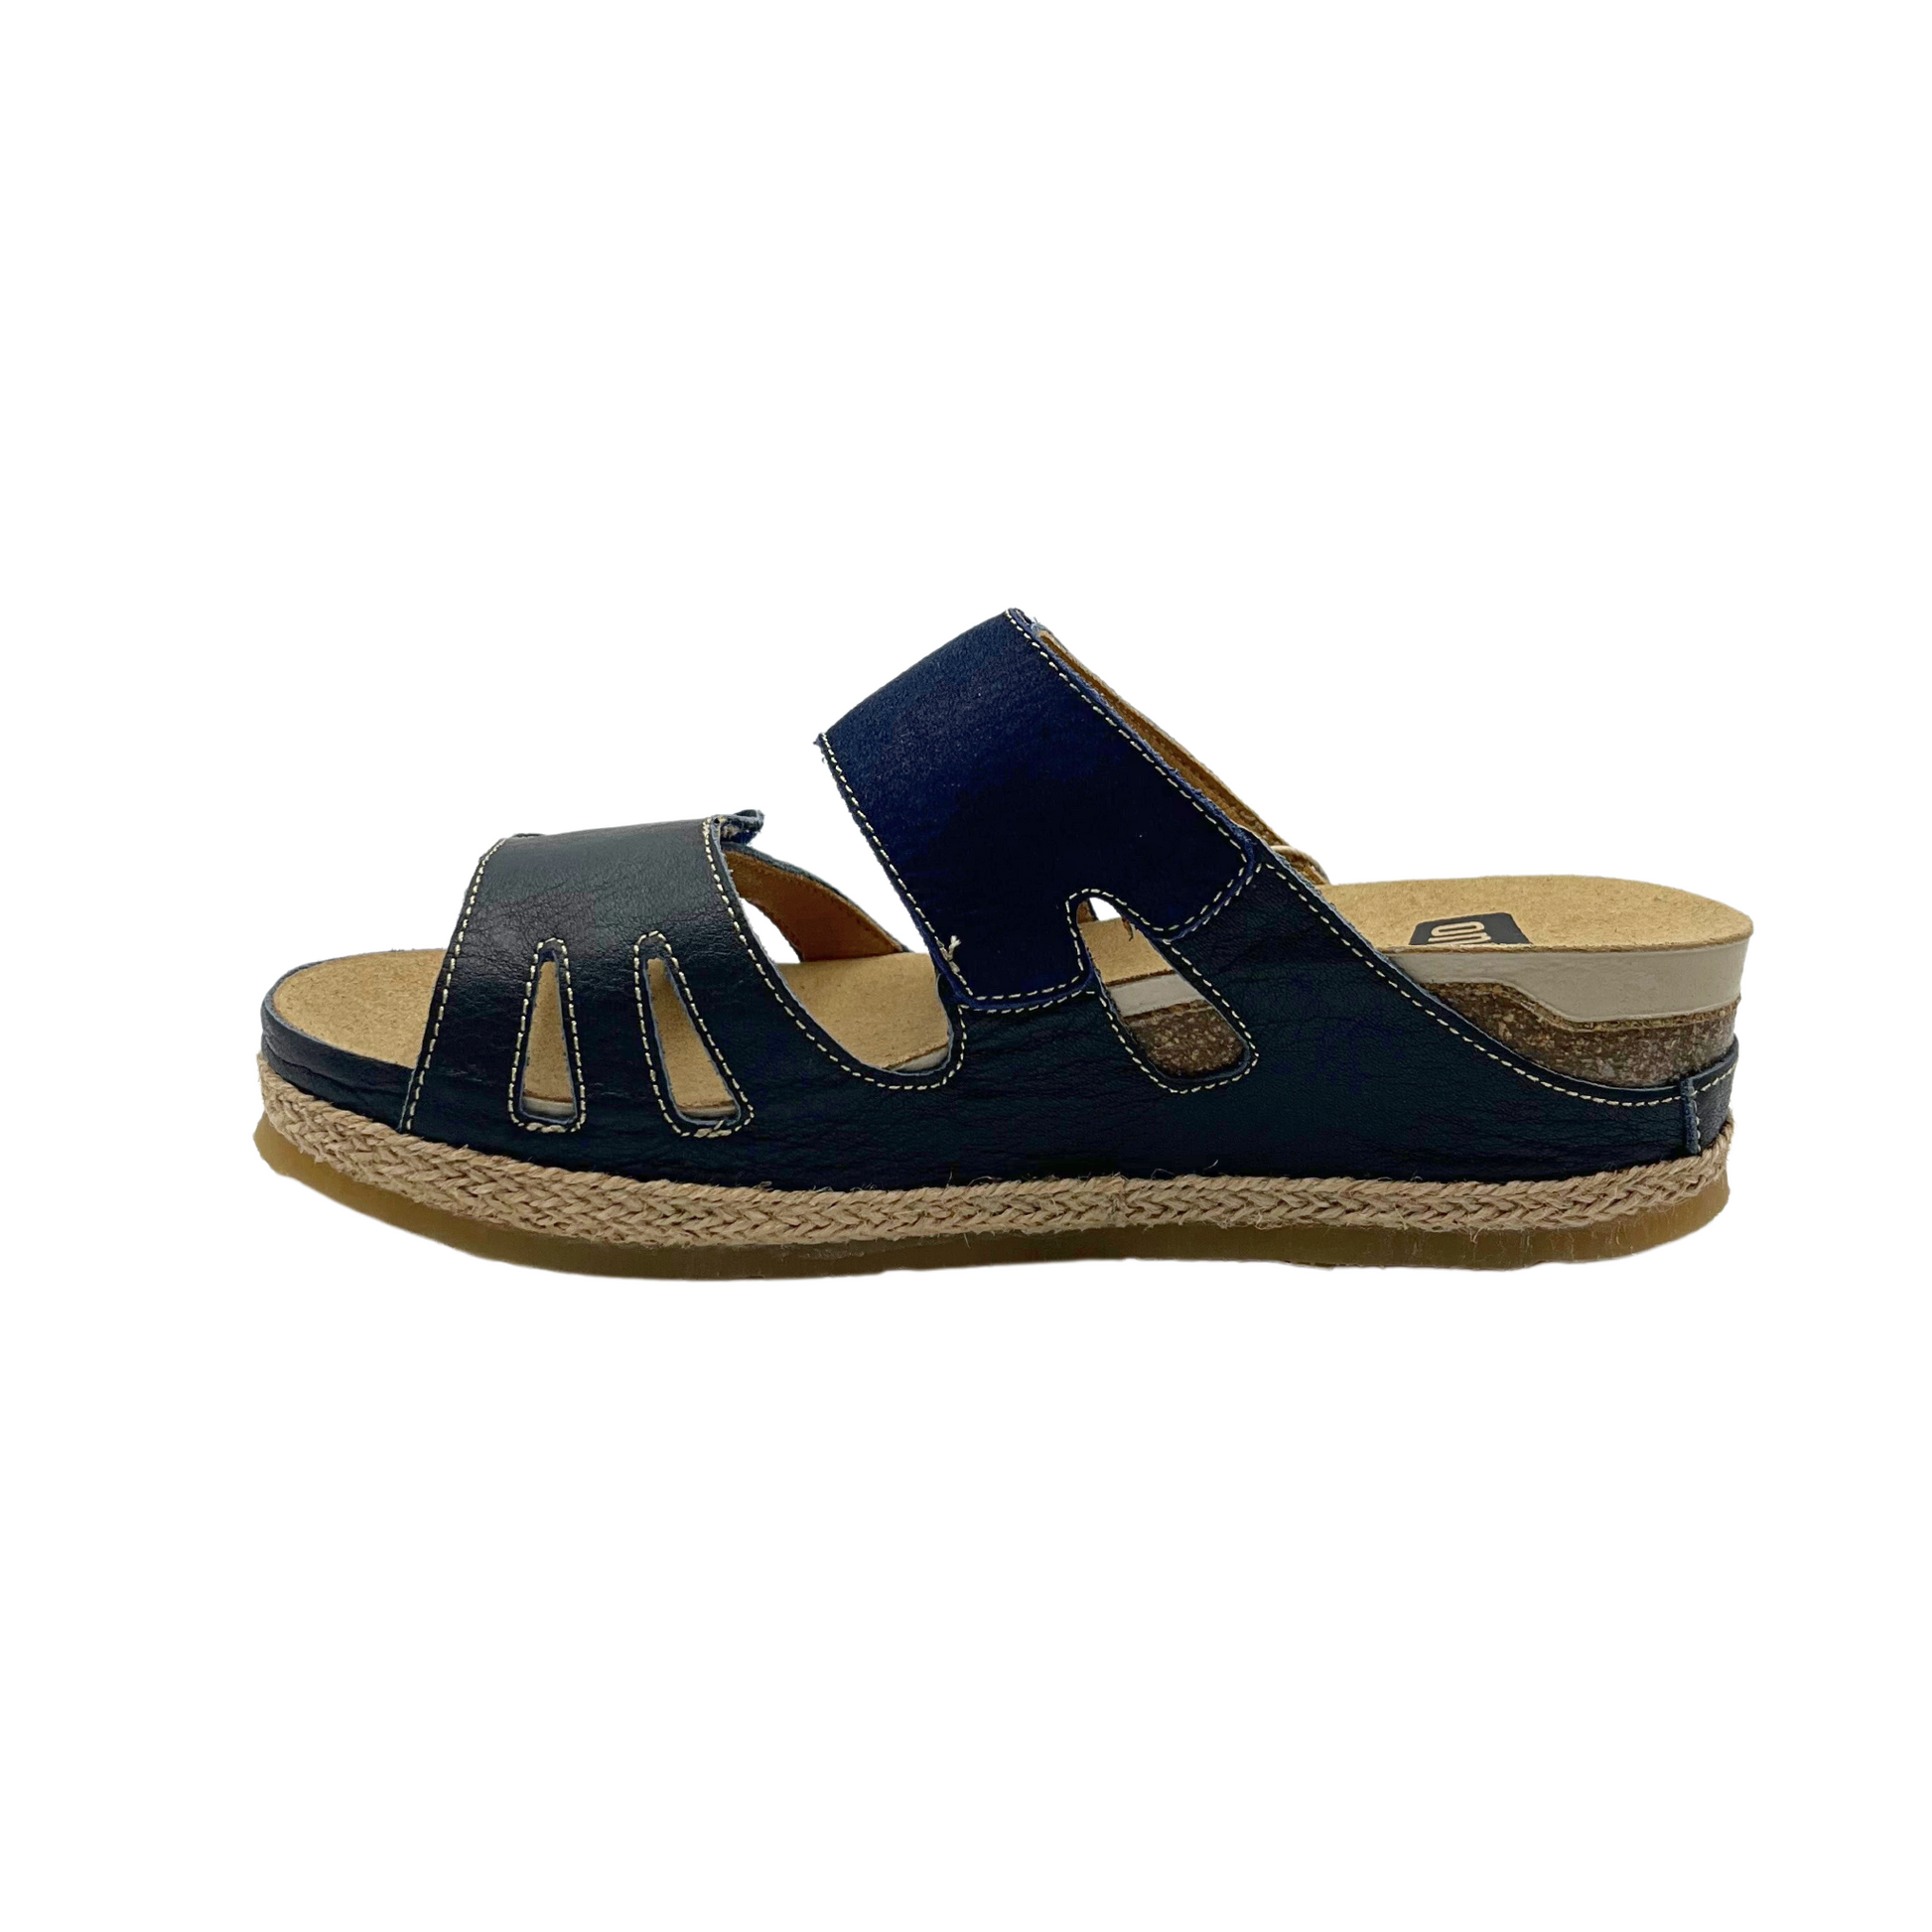 Outside view of open back sandal in navy.  Contoured footbed provides comfort and support.